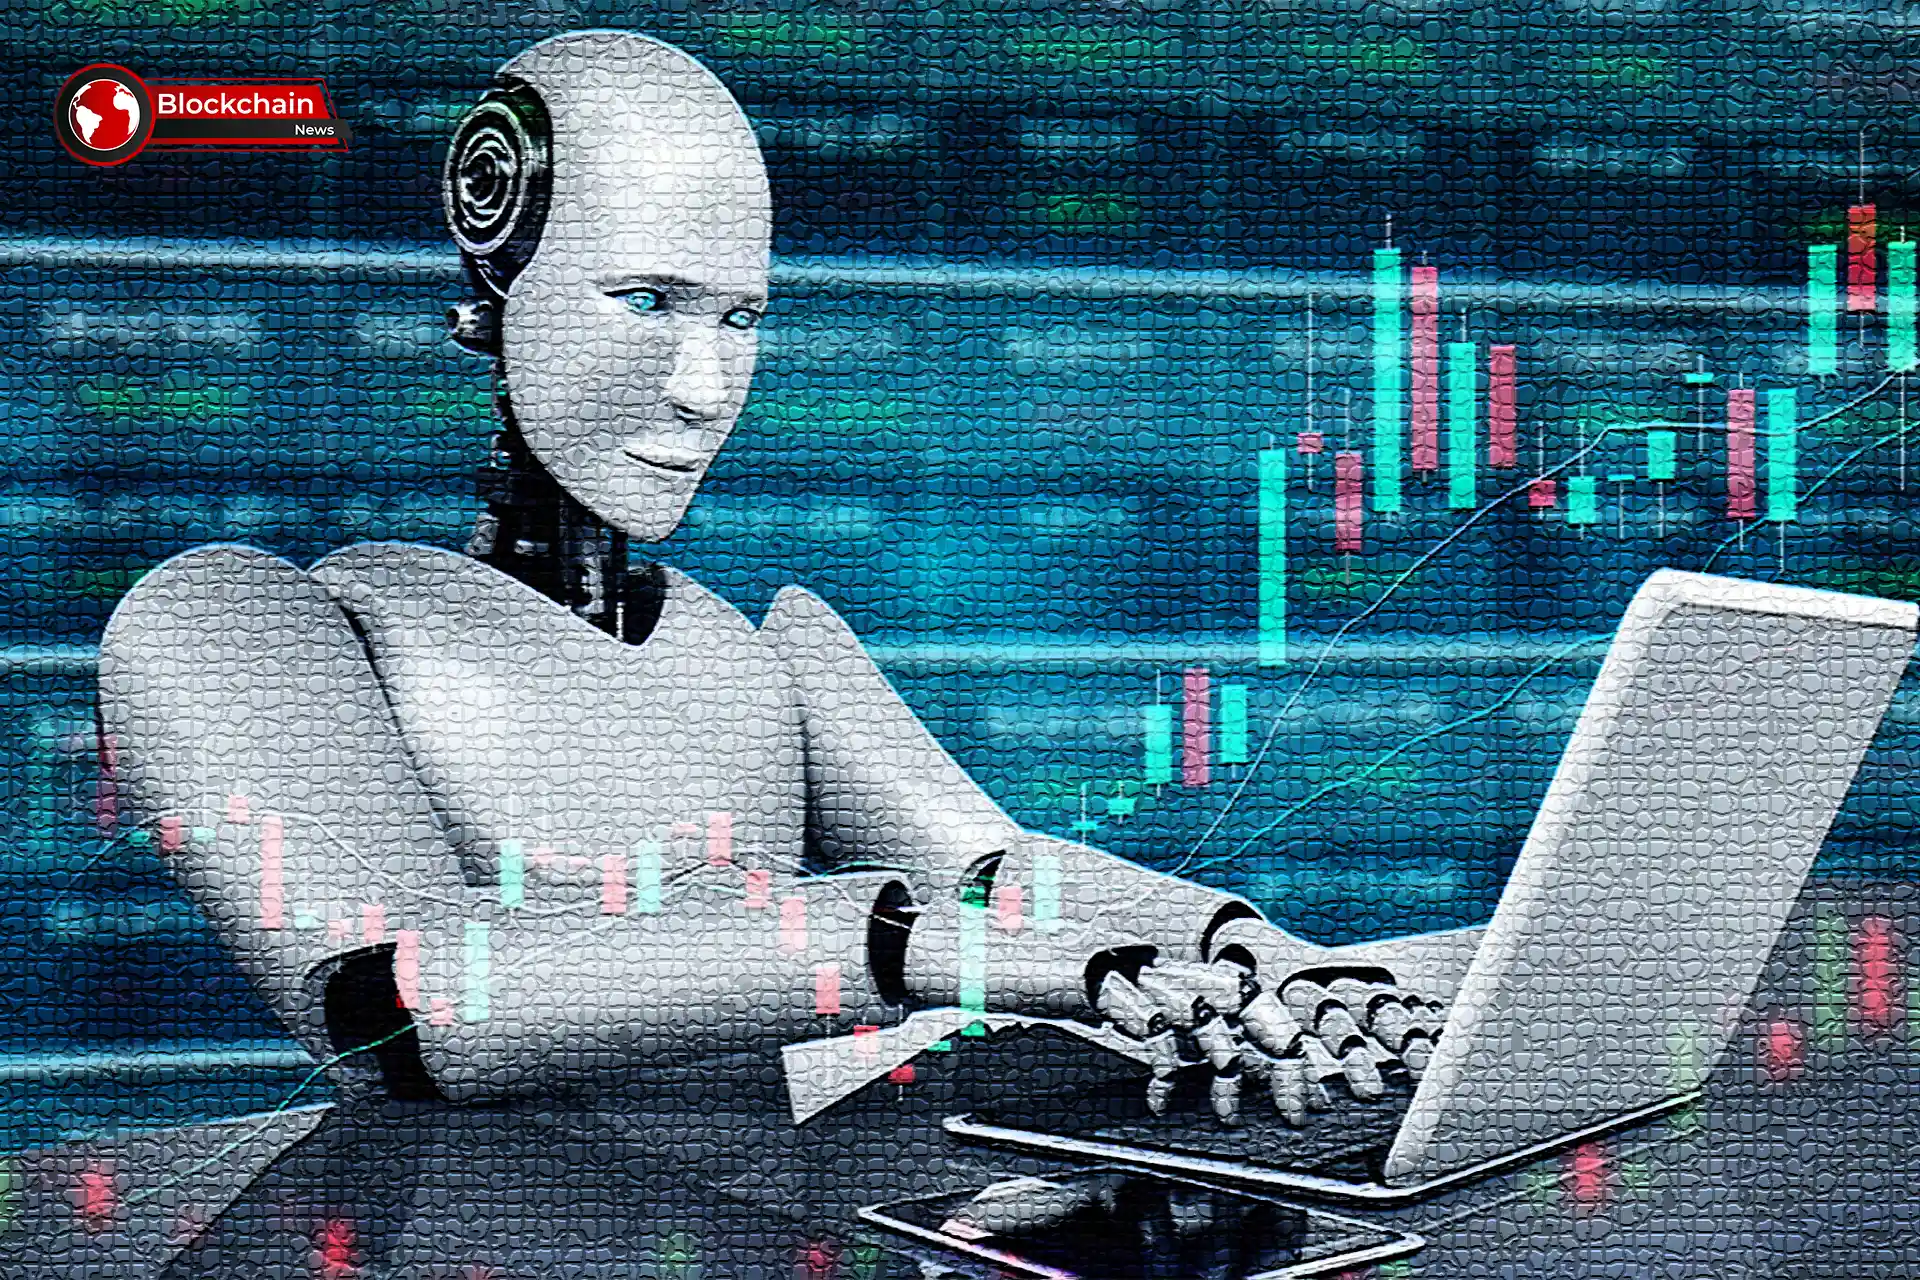 Artificial-intelligence-trading-robot